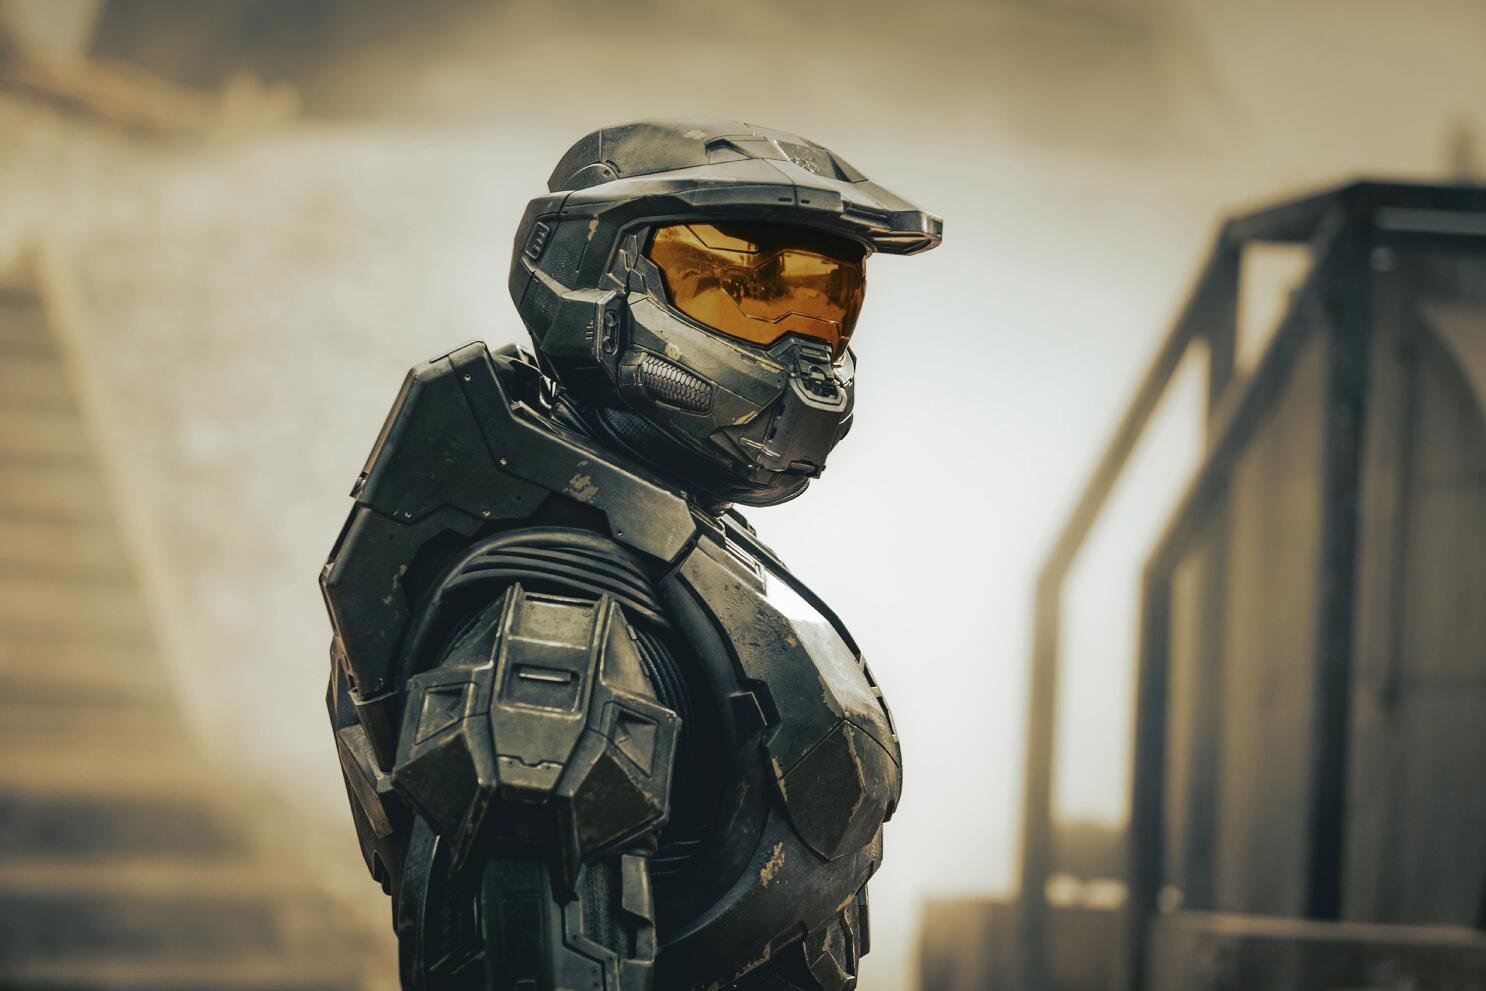 Halo TV series: 5 things you need to know before watching